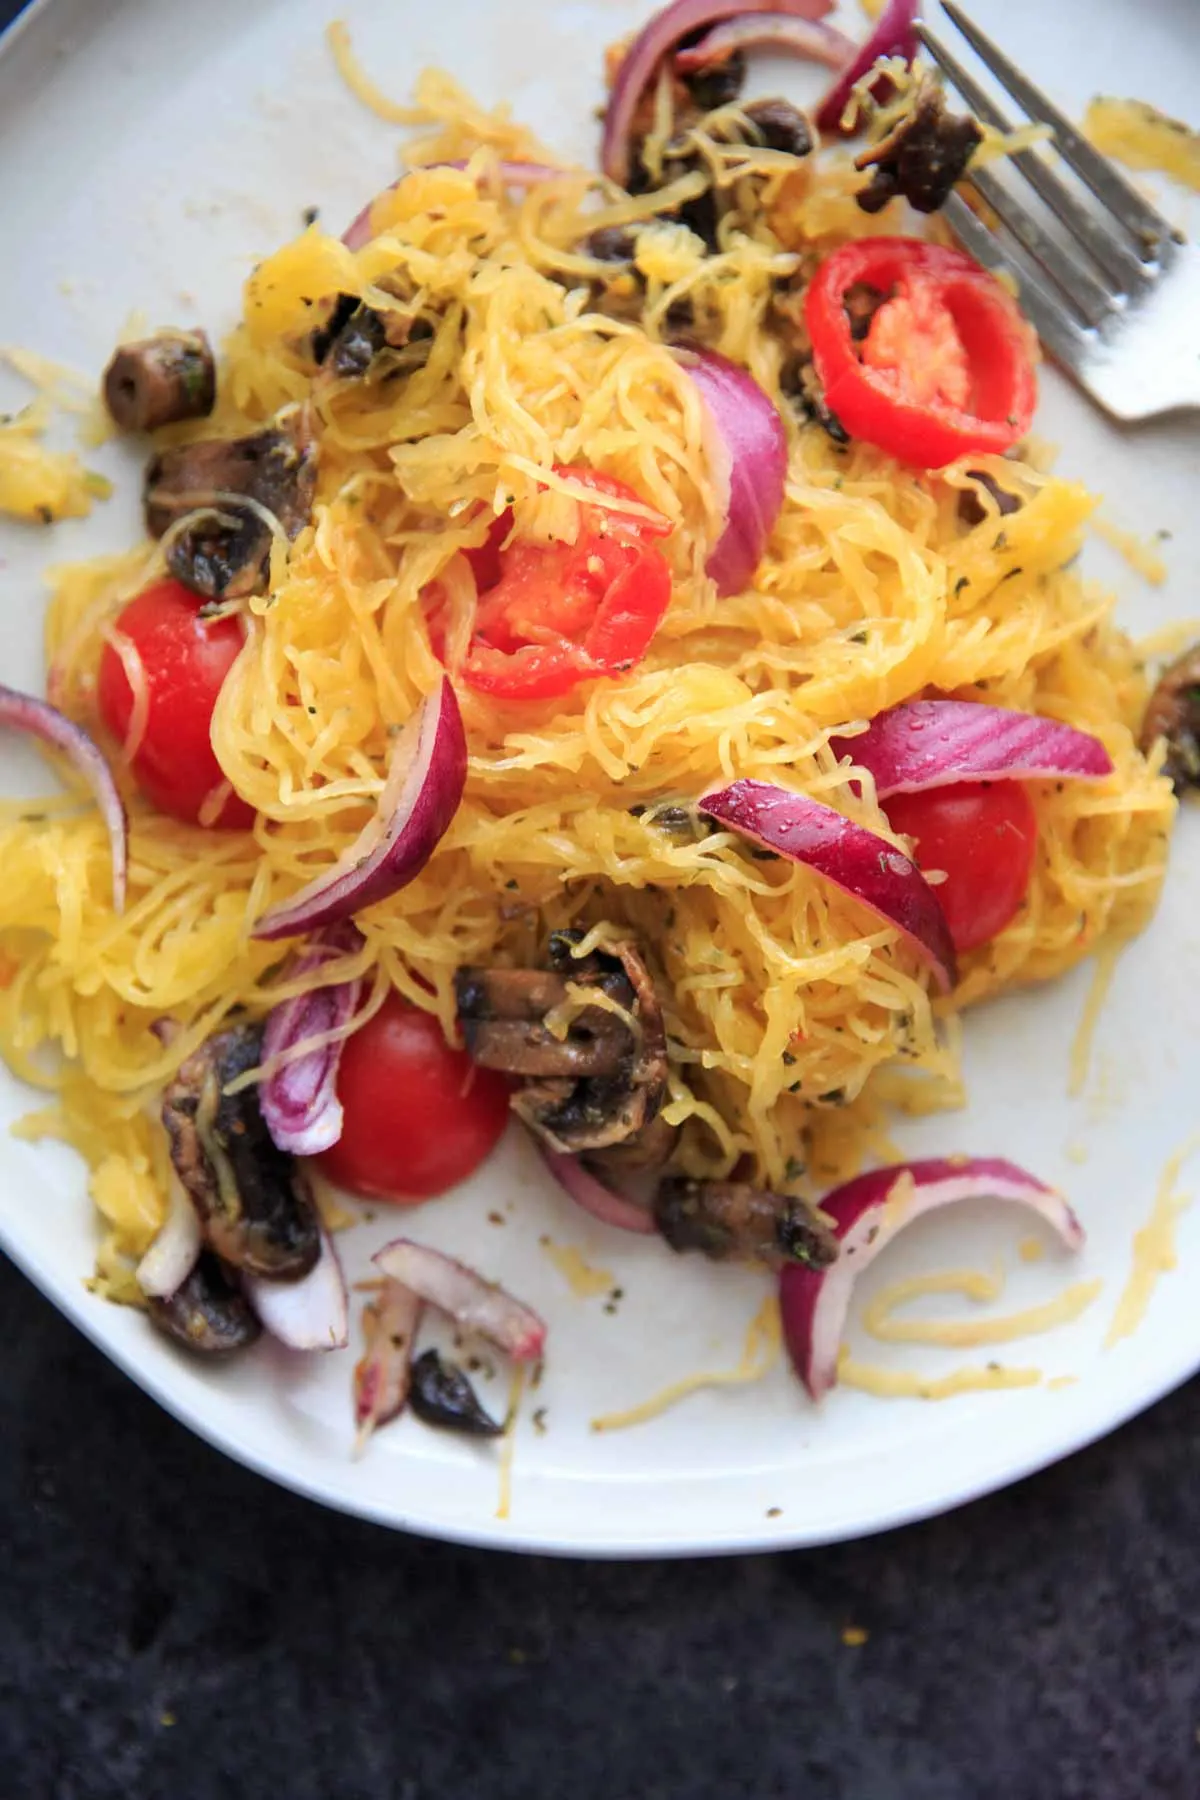 Spaghetti Squash with sauteed mushrooms, tomato and onion. A low-carb, gluten-free and vegan meal full of vegetables and flavor.